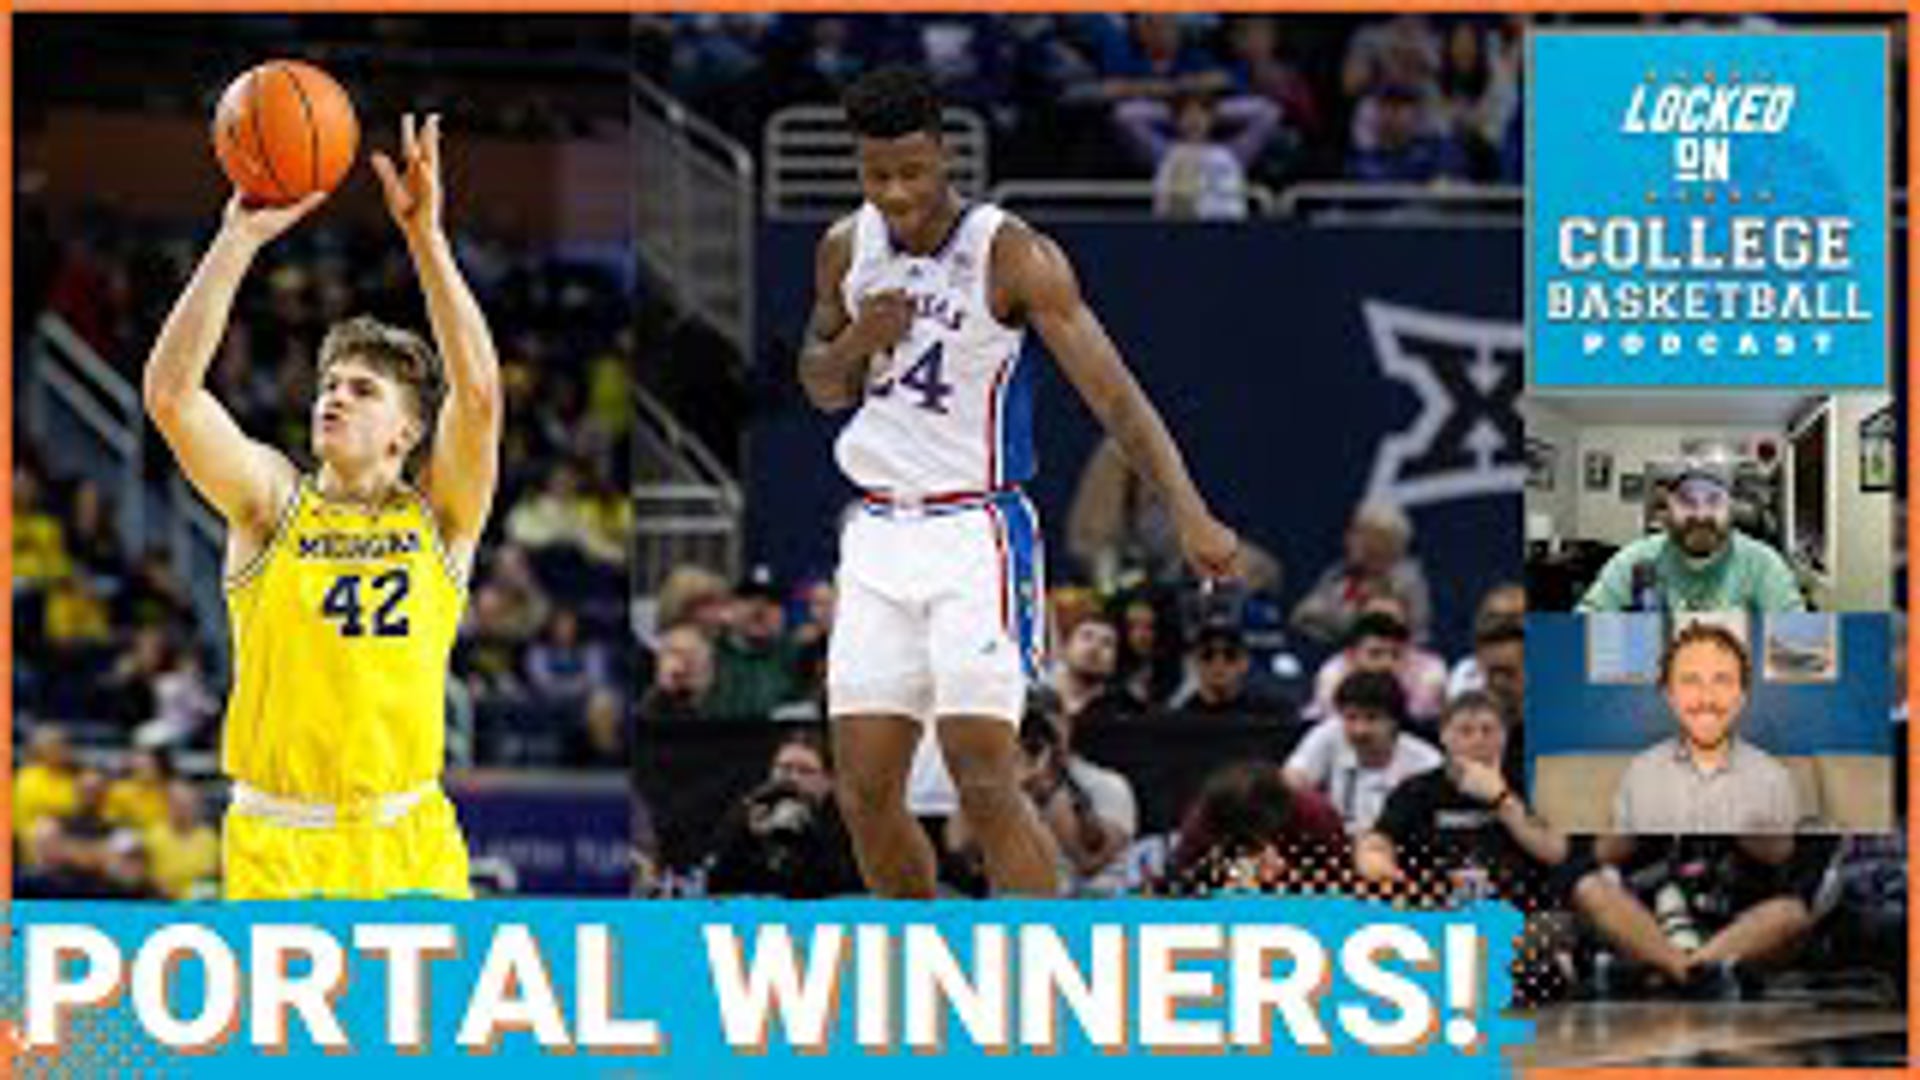 The college basketball transfer portal window closed on May 1, and so far the Kansas Jayhawks are the big portal winners.